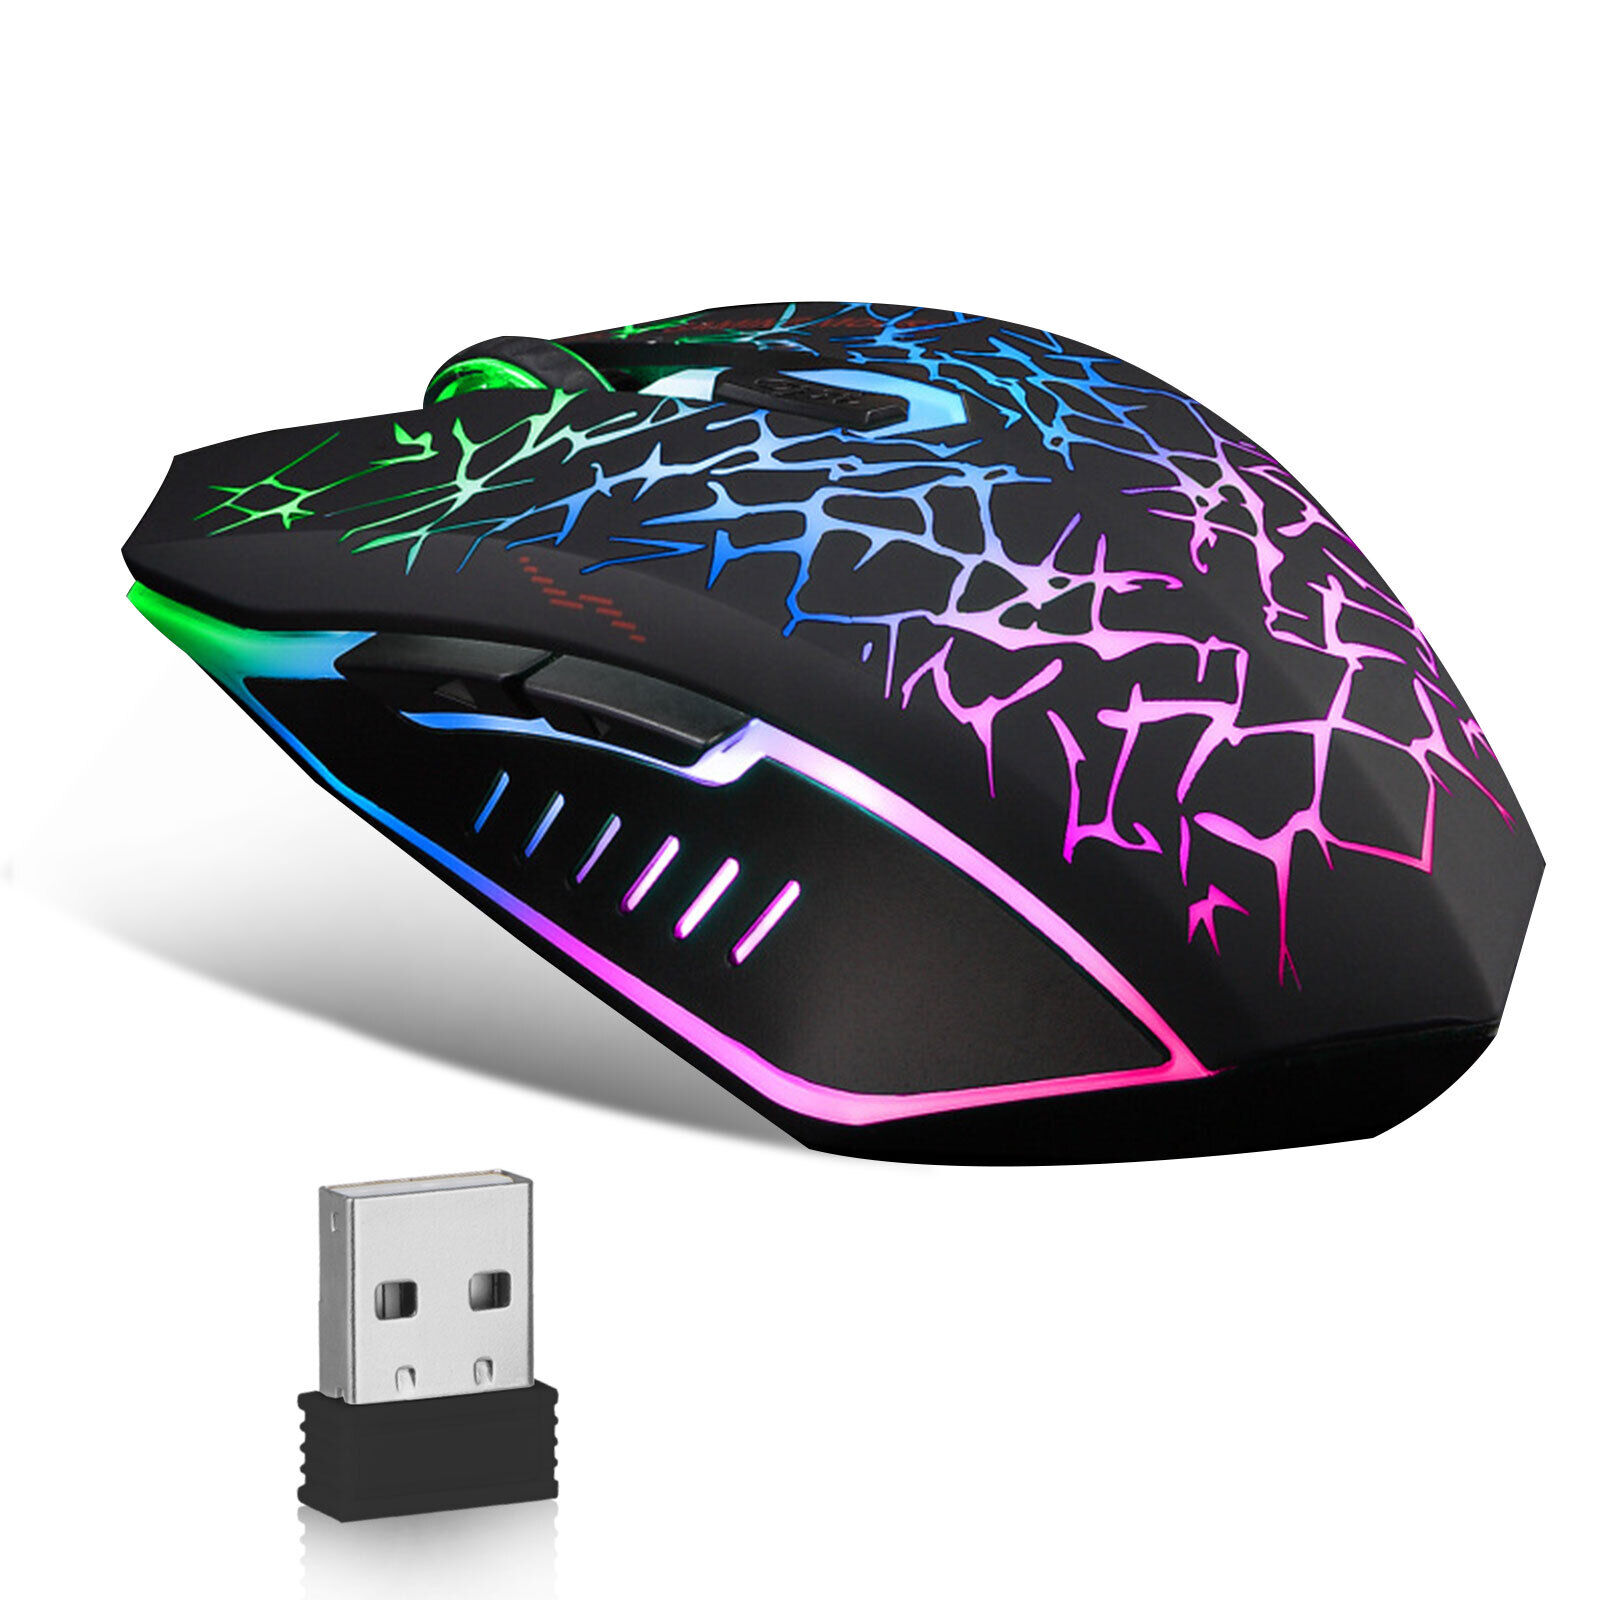 2.4GHz Wireless Optical Mouse Mice & USB Receiver 2400 DPI for Laptop Computer